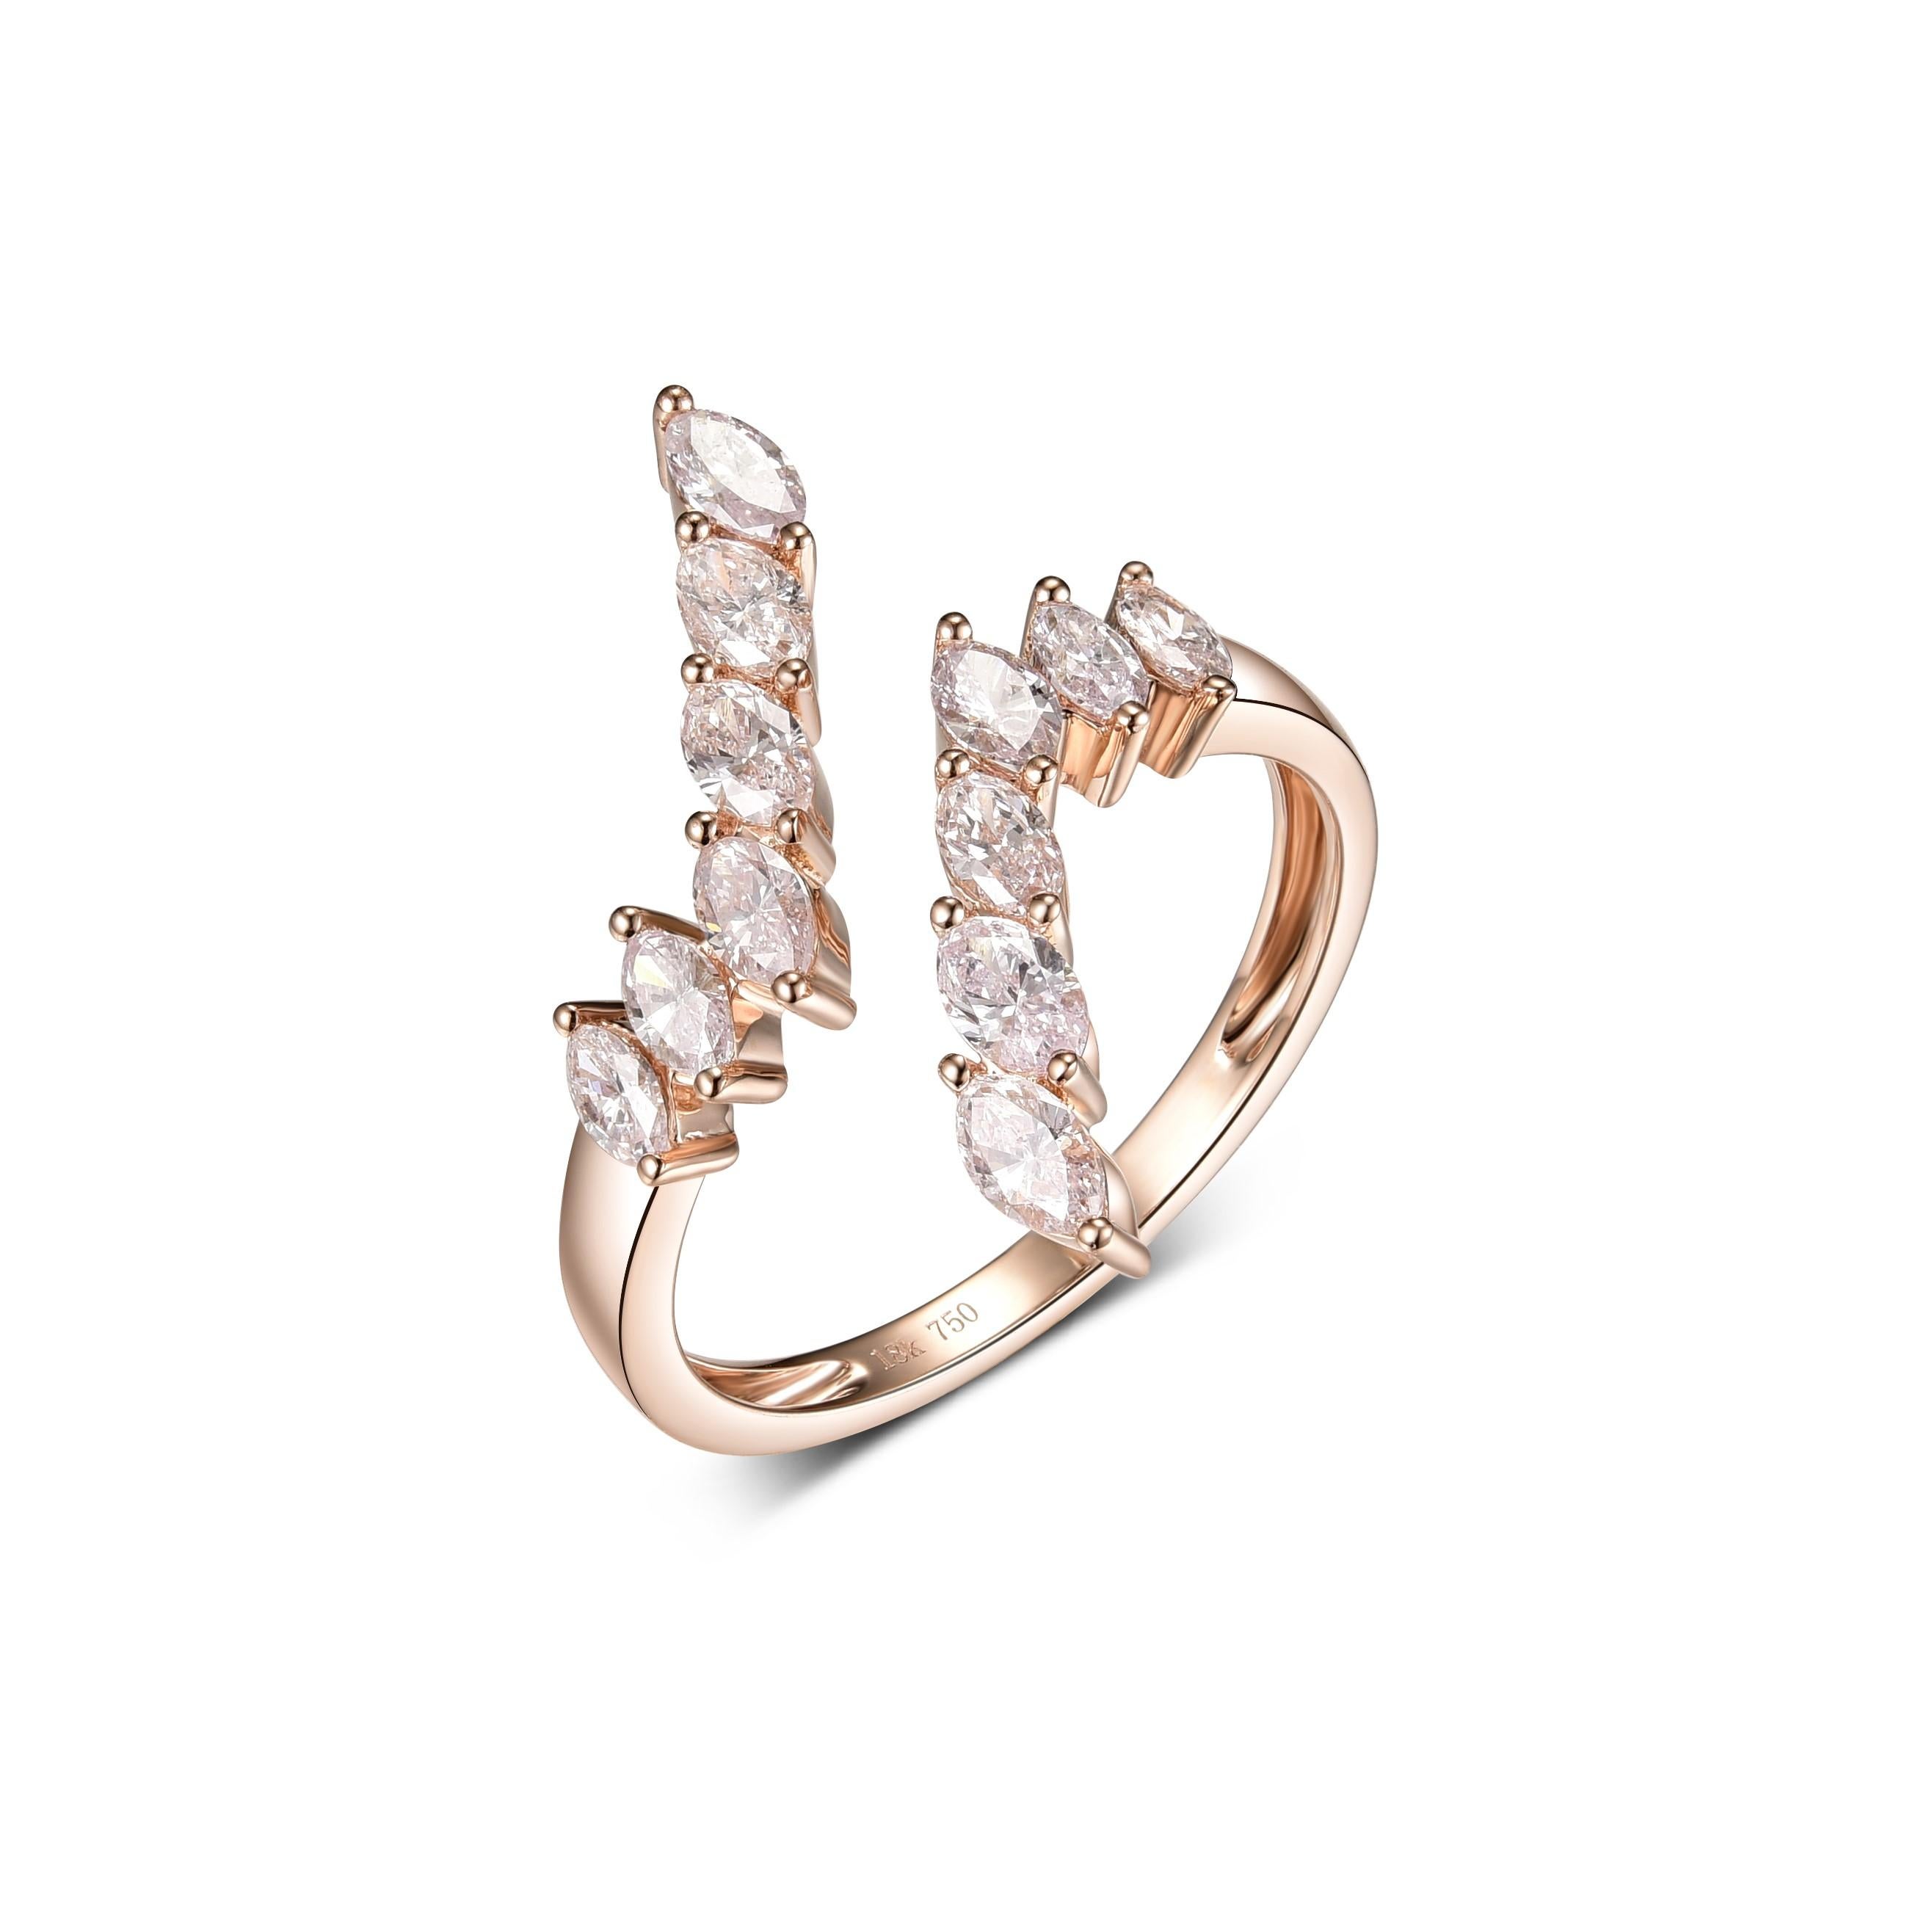 This diamond ring feature 0.94 carat of marquise light pink diamond.  Ring is set in 18 karat rose gold. Great for everyday use and it is stack-able with other ring.

US 6.5
Complimentary resizing upon request
18 Karat Rose Gold
Marquise Light Pink